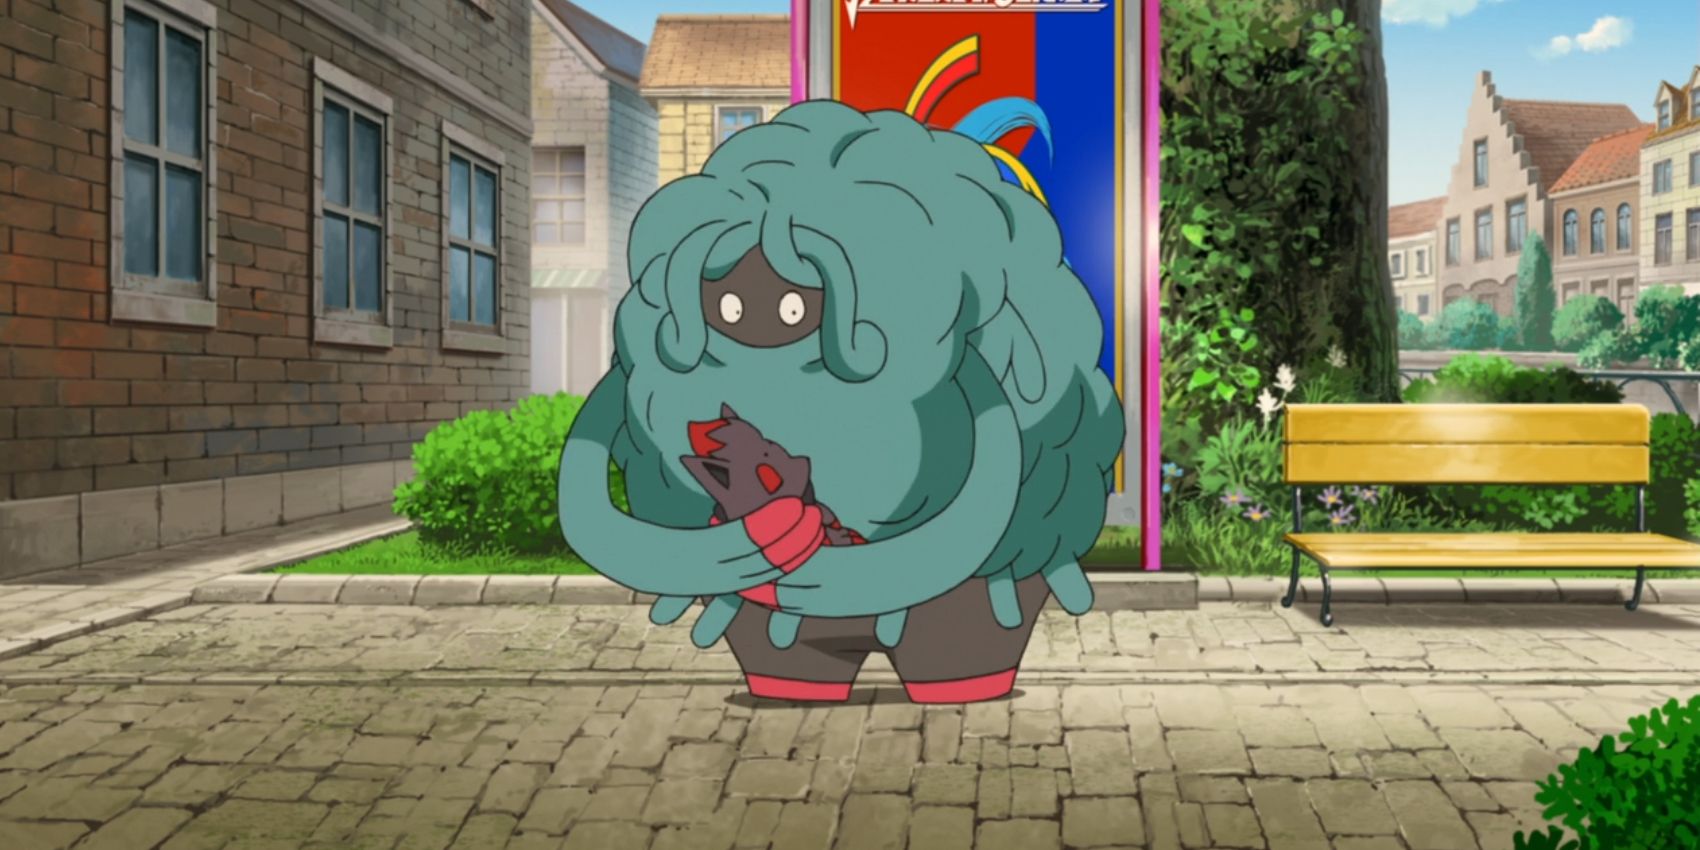 Tangrowth stands alone on a town's cobblestone street in a scene from the Pokémon anime.